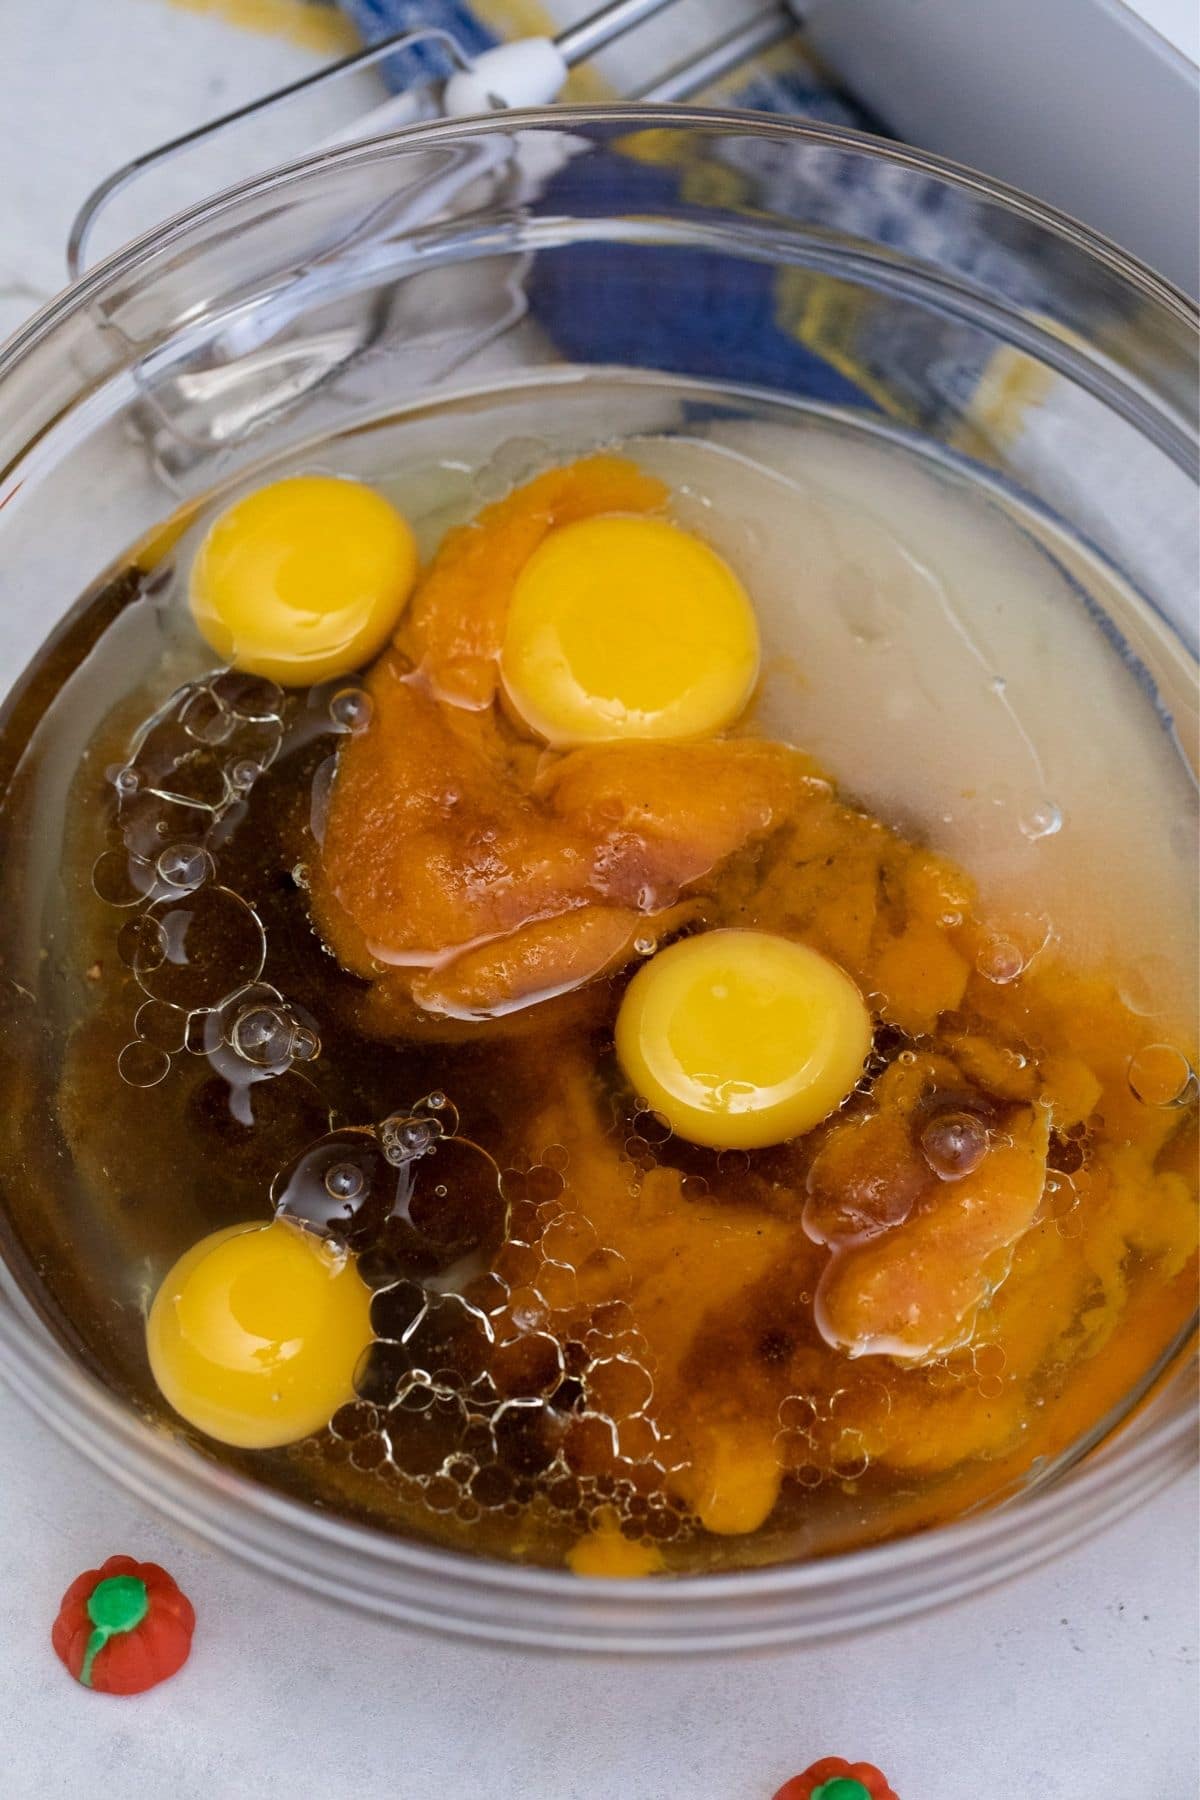 Large glass bowl of pumpkin puree eggs and oil